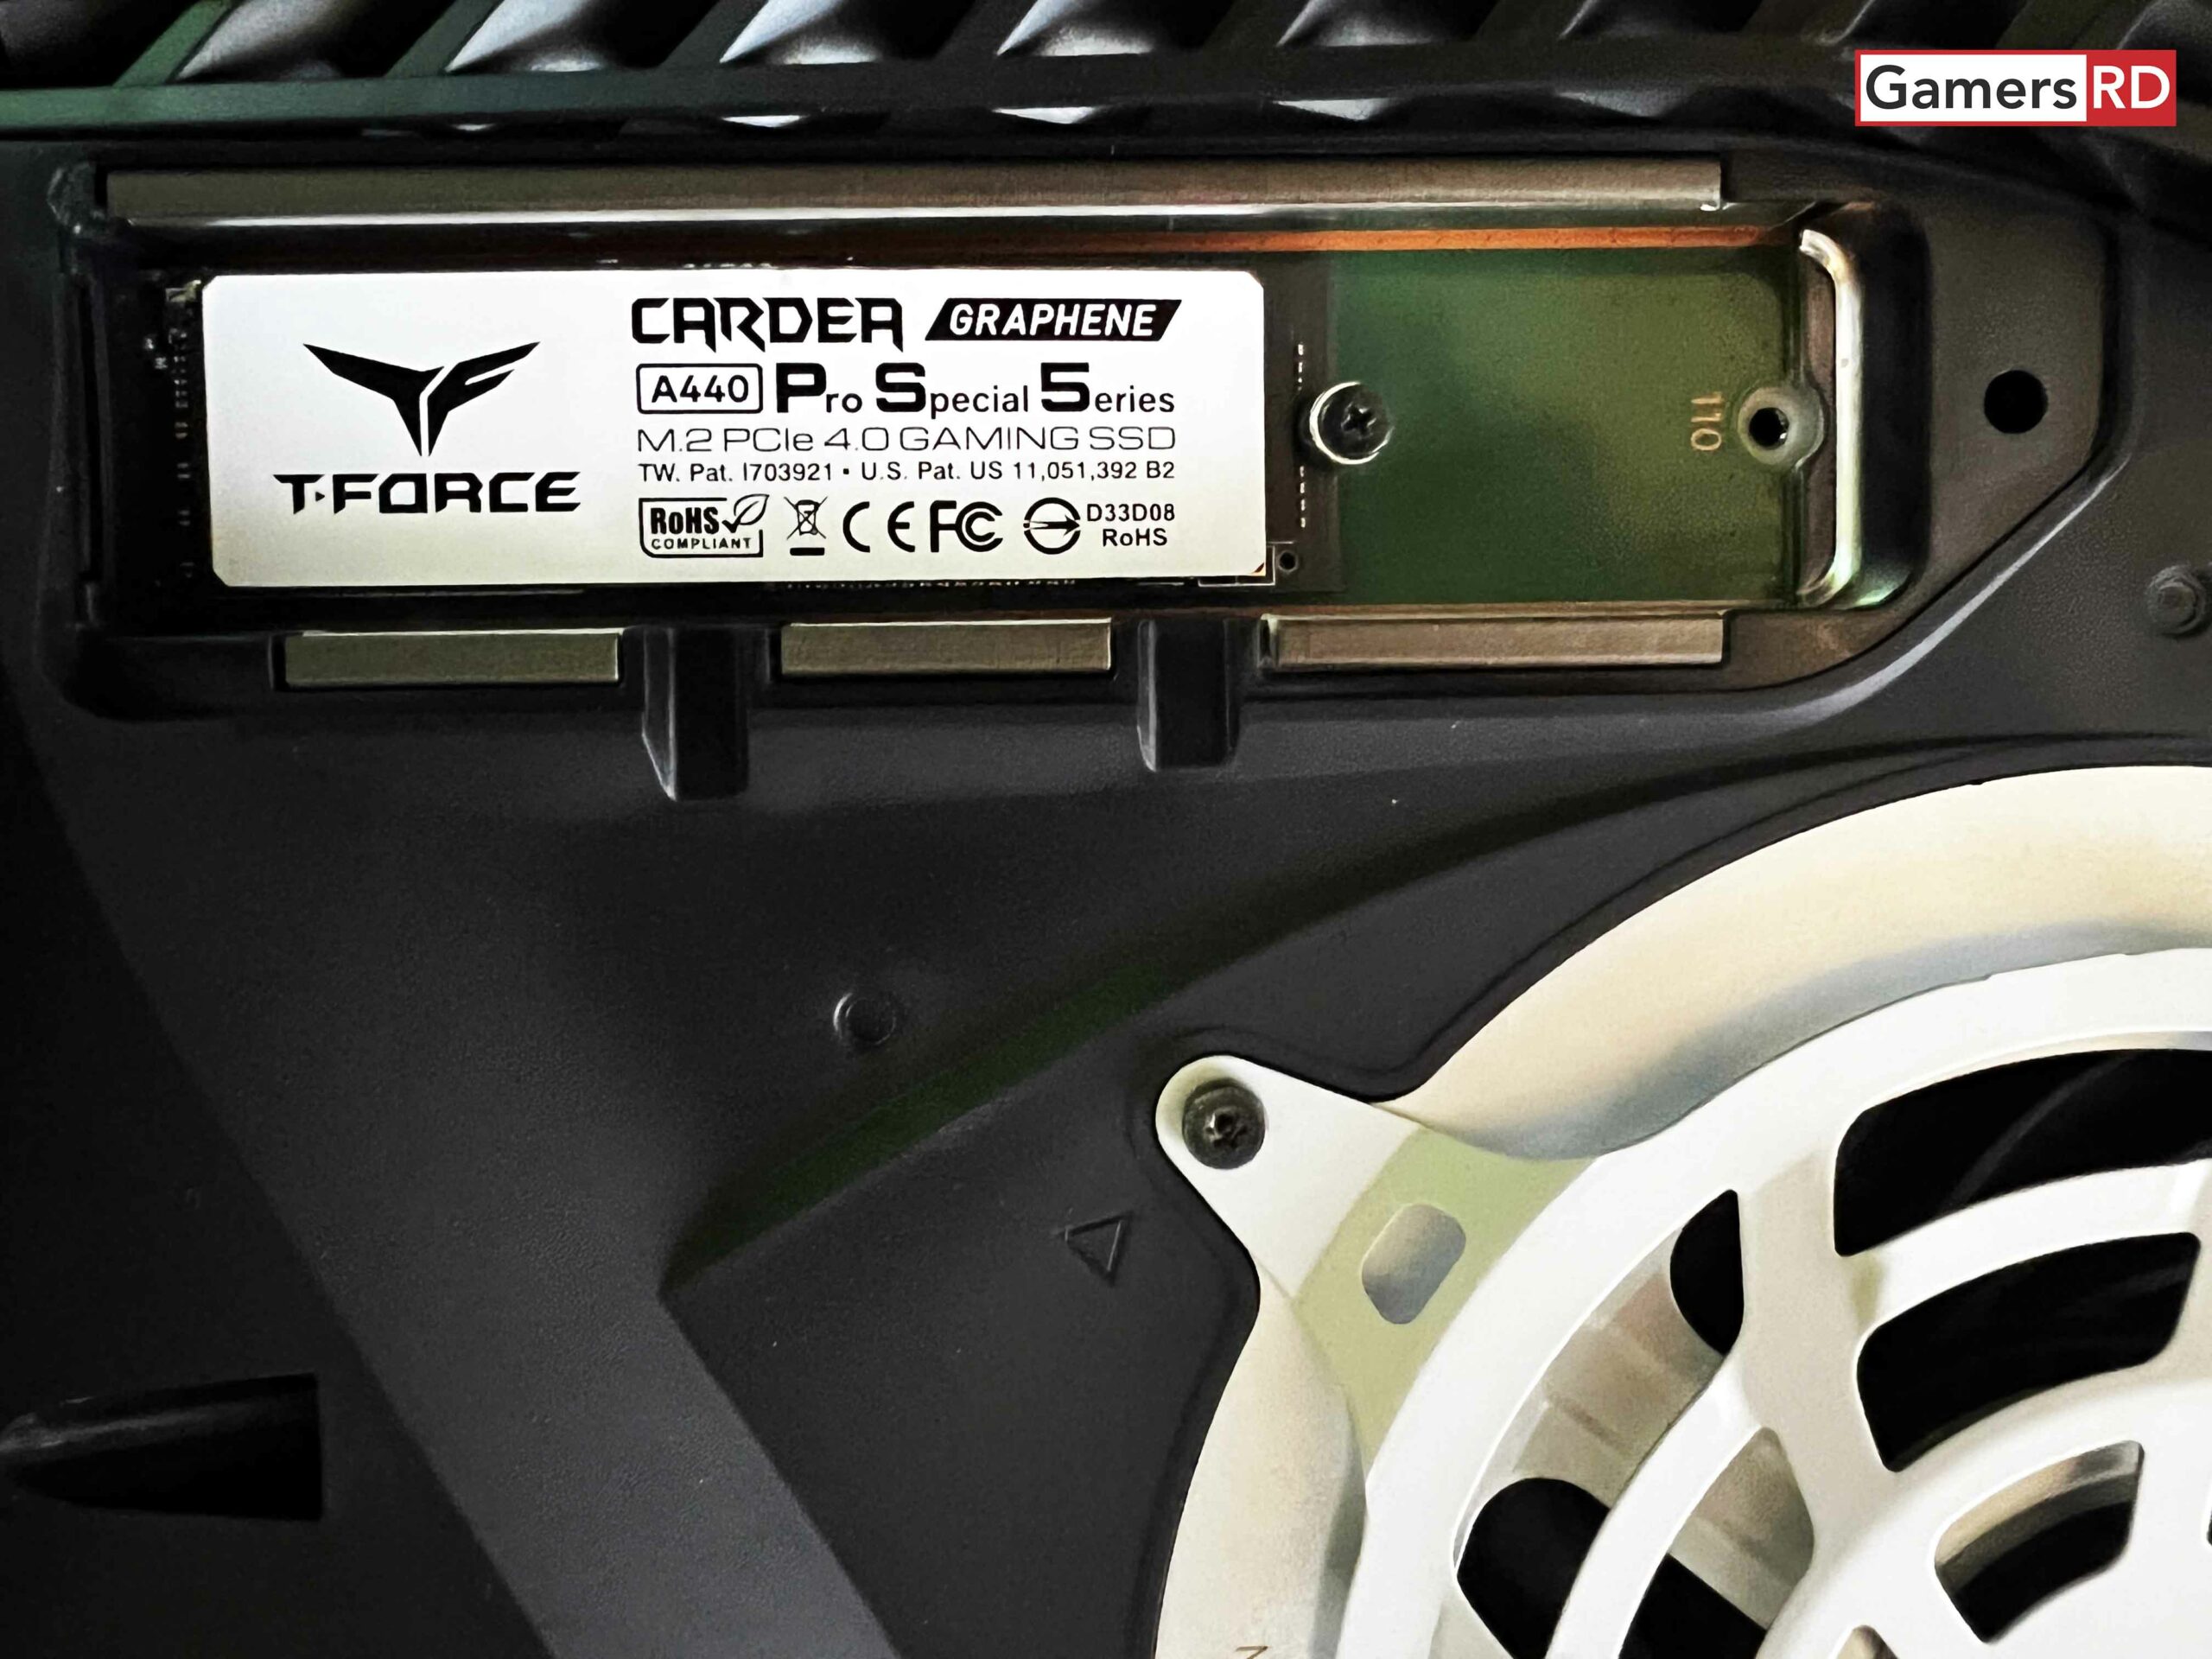 TEAMGROUP T-FORCE CARDEA A440 Pro Special Series SSD M.2 PS5 Review, 9 GamersRD